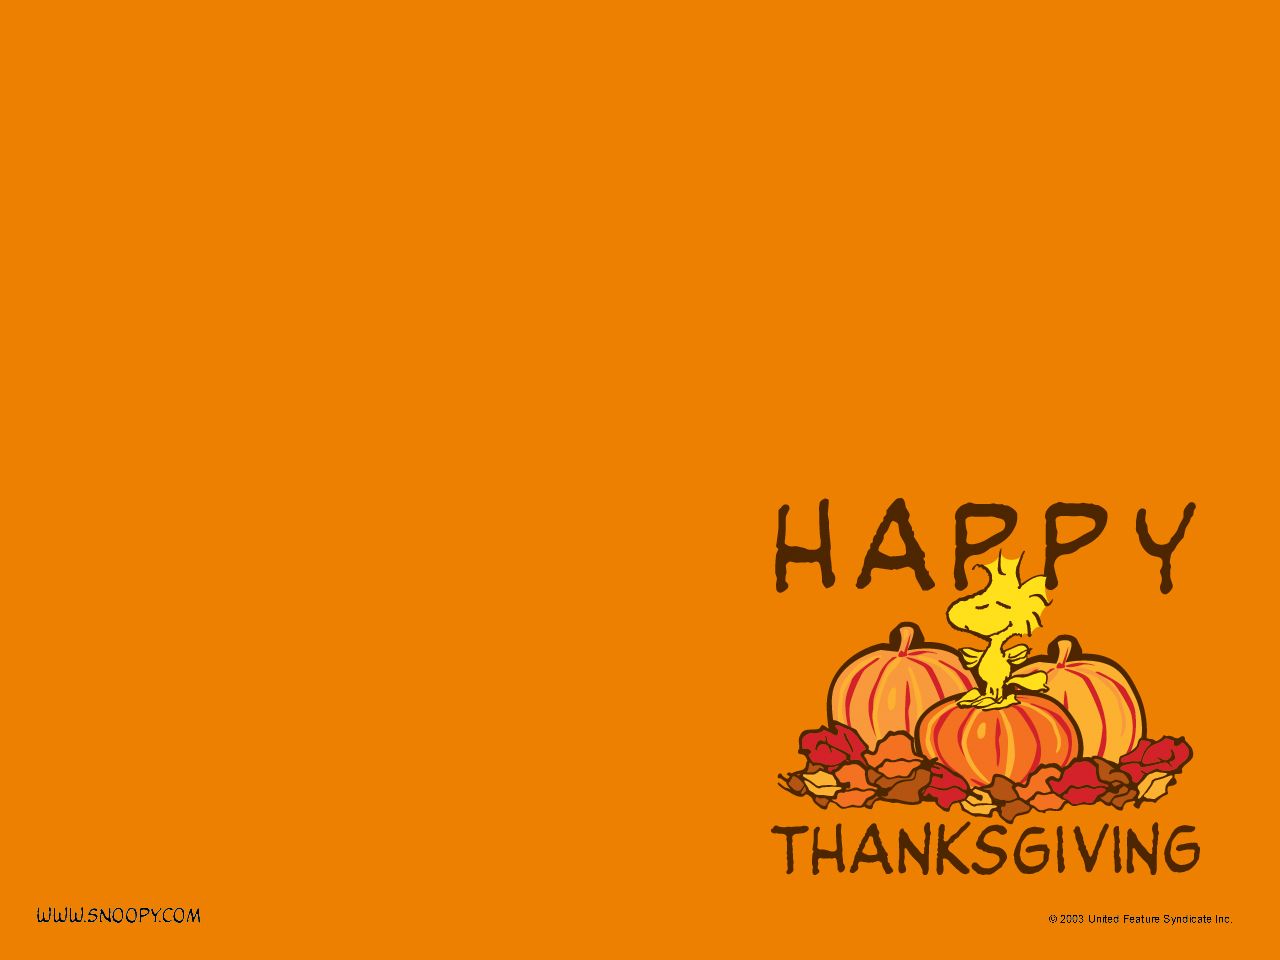 10 Thanksgiving wallpapers to be thankful for - Design Reviver ...